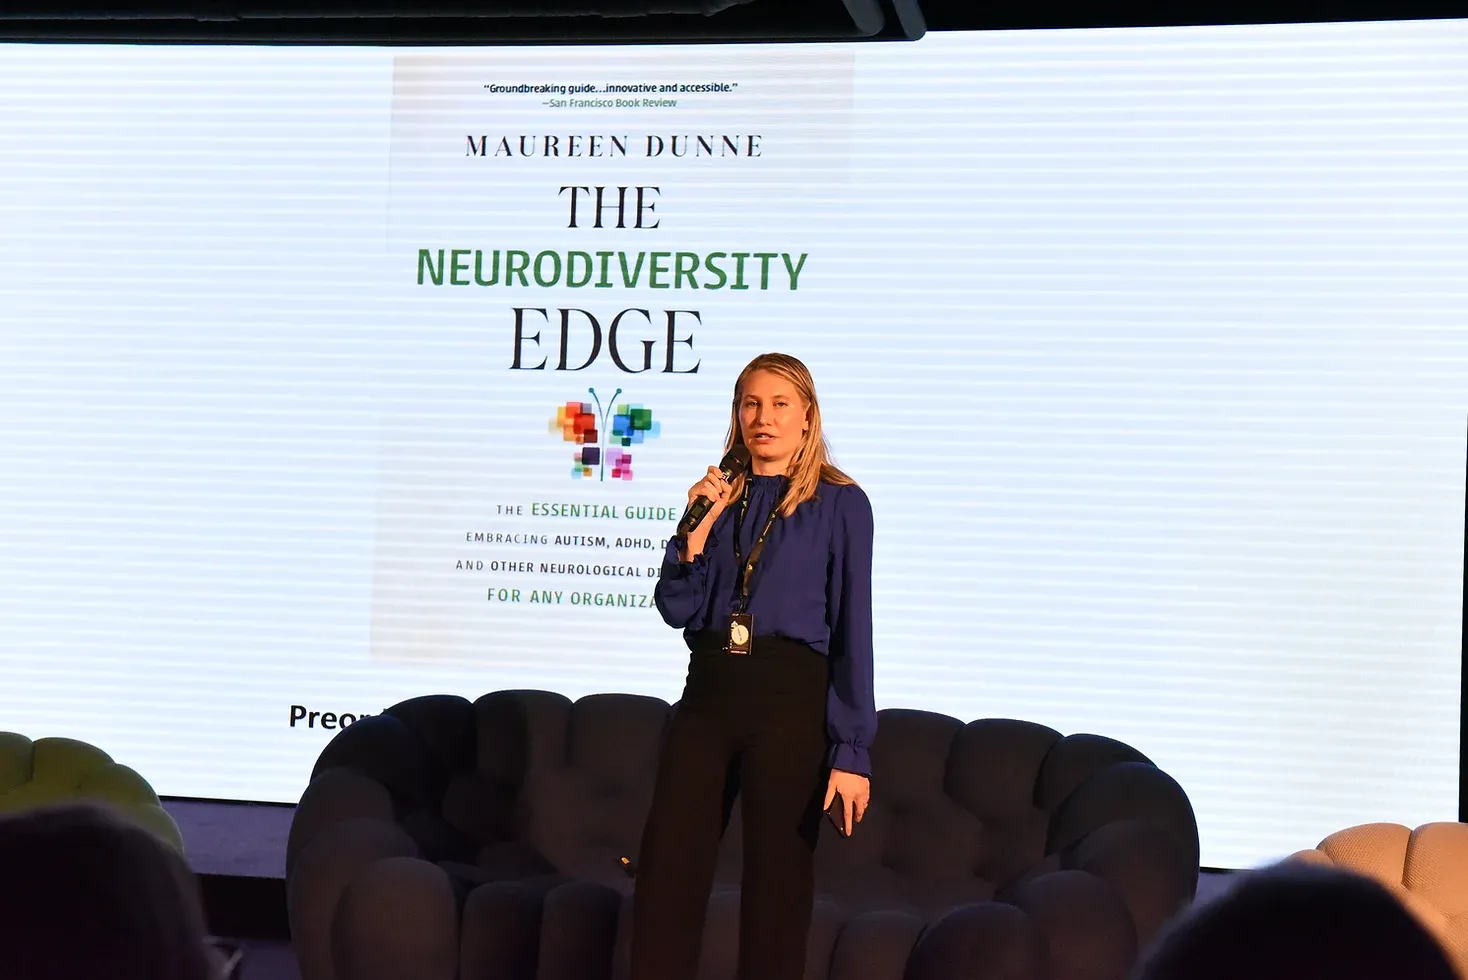 ‘The Neurodiversity Edge’ By Maureen Dunne Is A Guide To Ensure Inclusion Of Neurological Differences